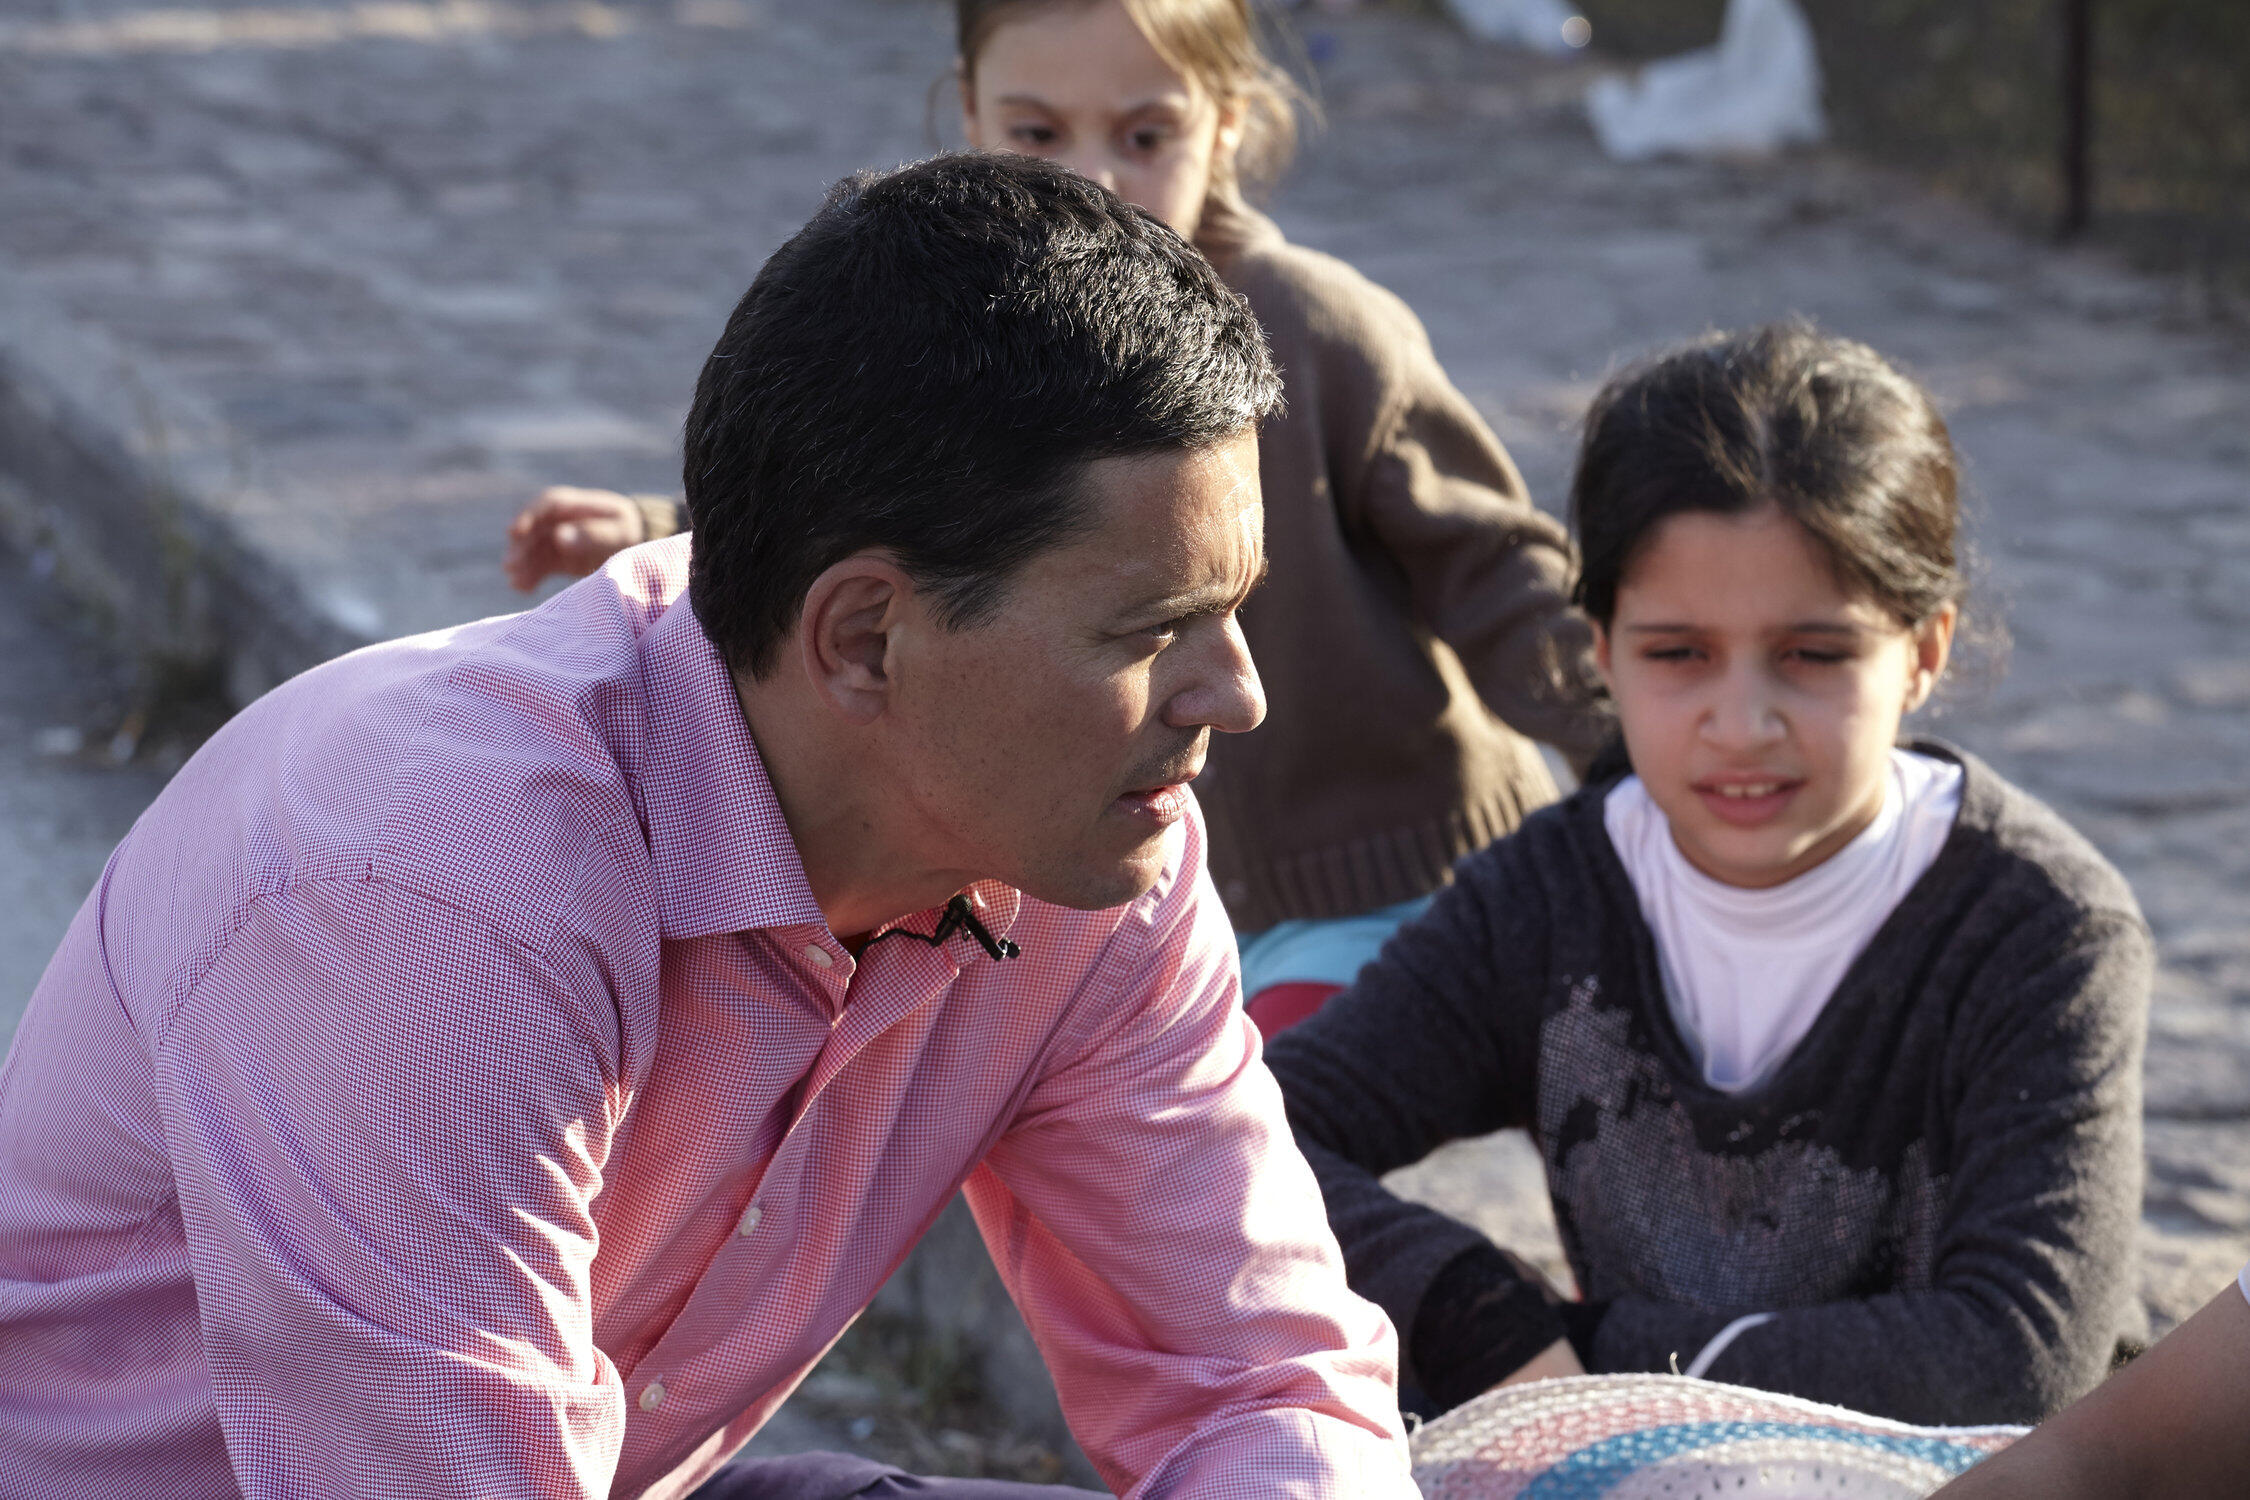 David Miliband with refugee children in Greece